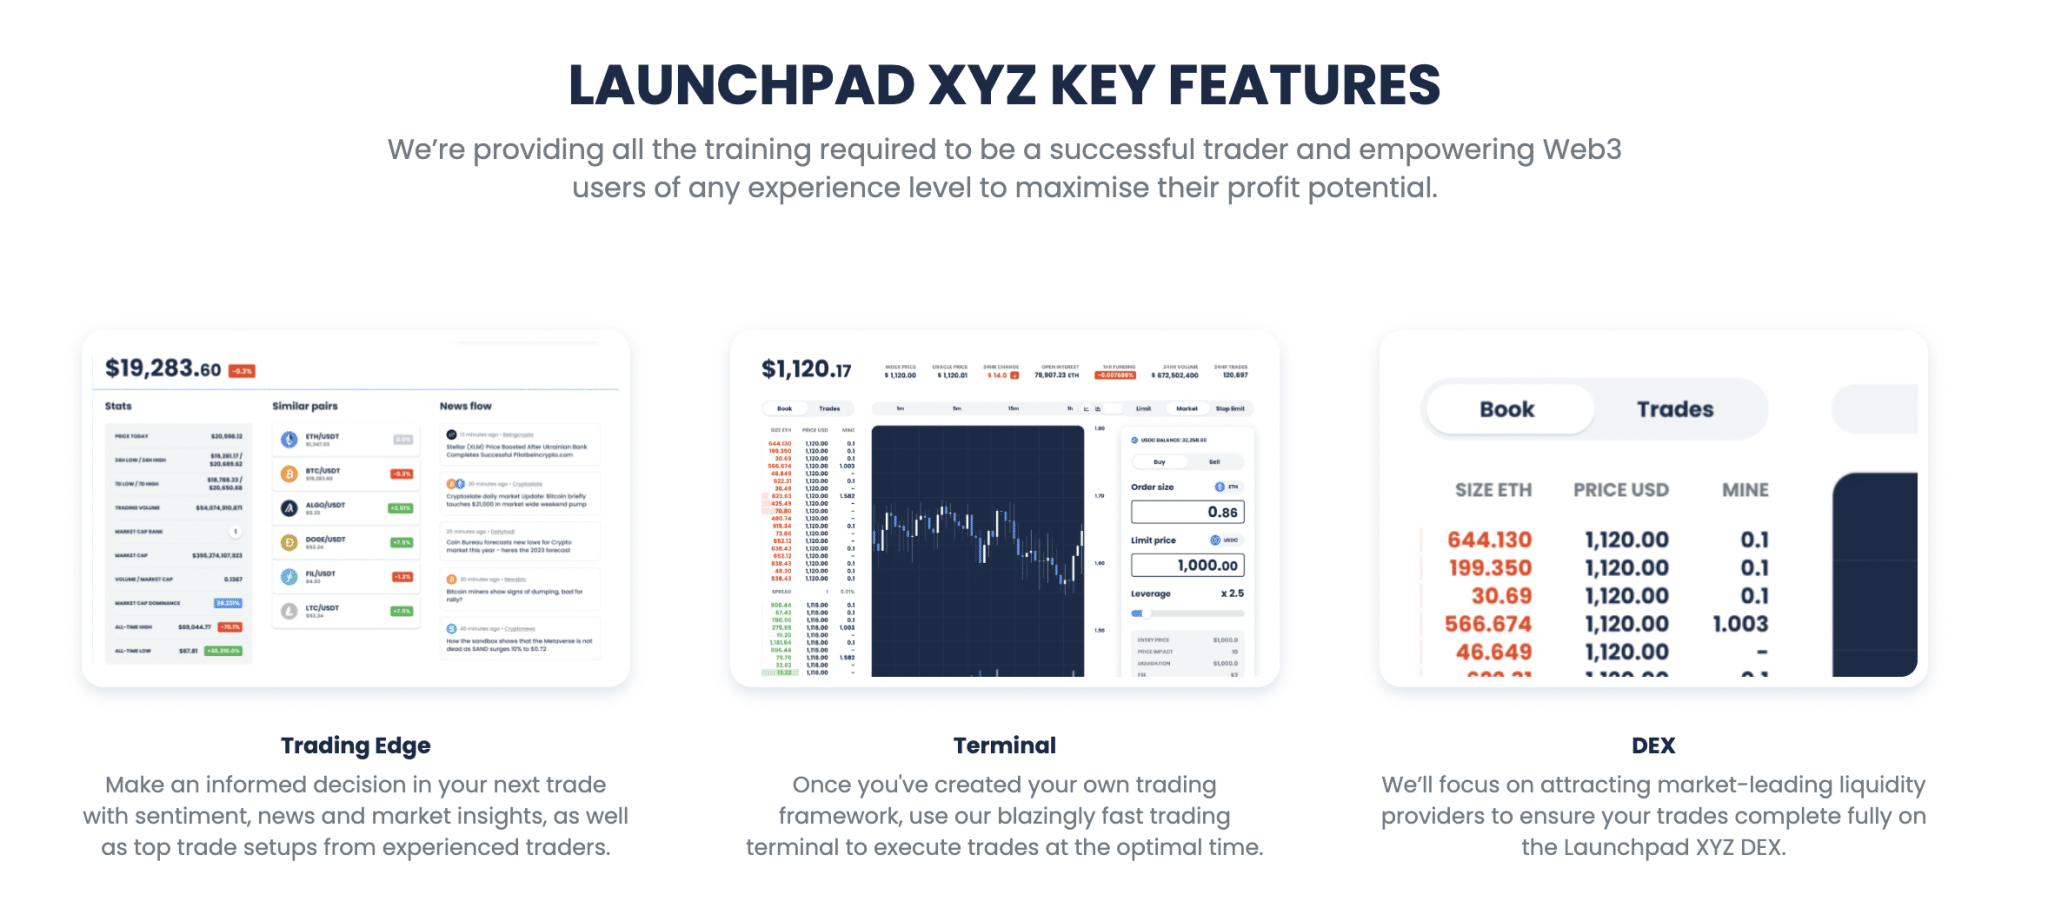 Launchpad.xyz core features